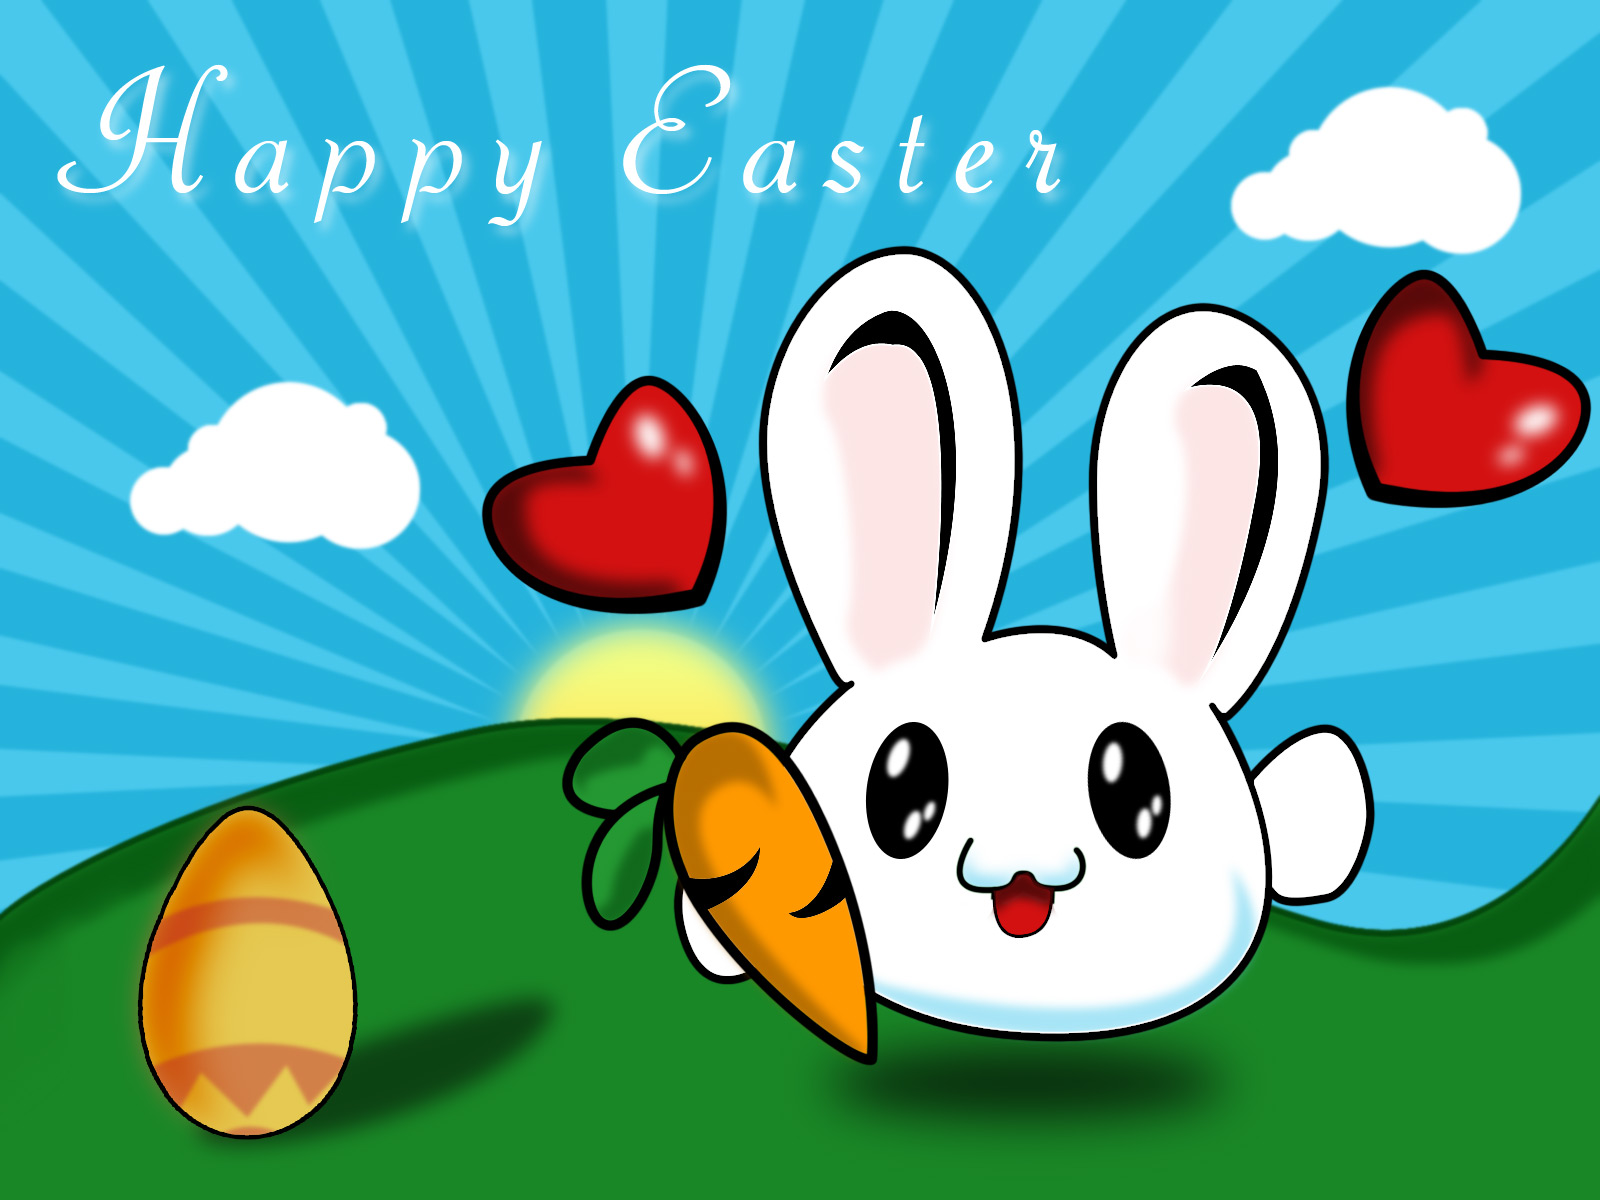 Happy Easter Bunny Pictures - Easter Cartoon Wallpaper For Computer -  1600x1200 Wallpaper 